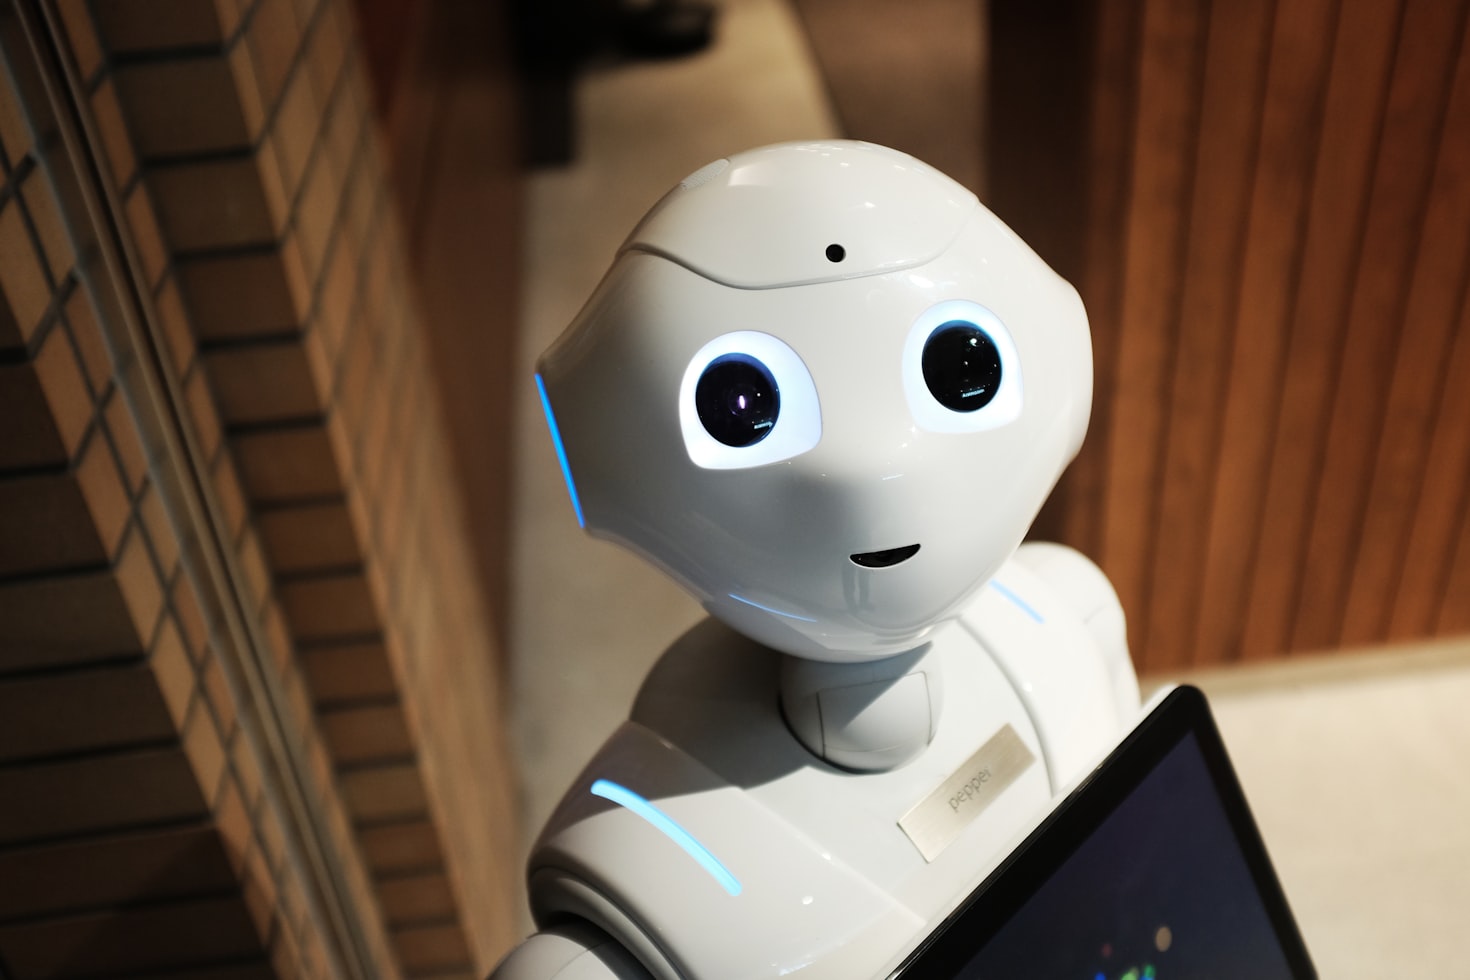 Pepper, the friendly humanoid robot developed by Softbank. The actuary of the future?